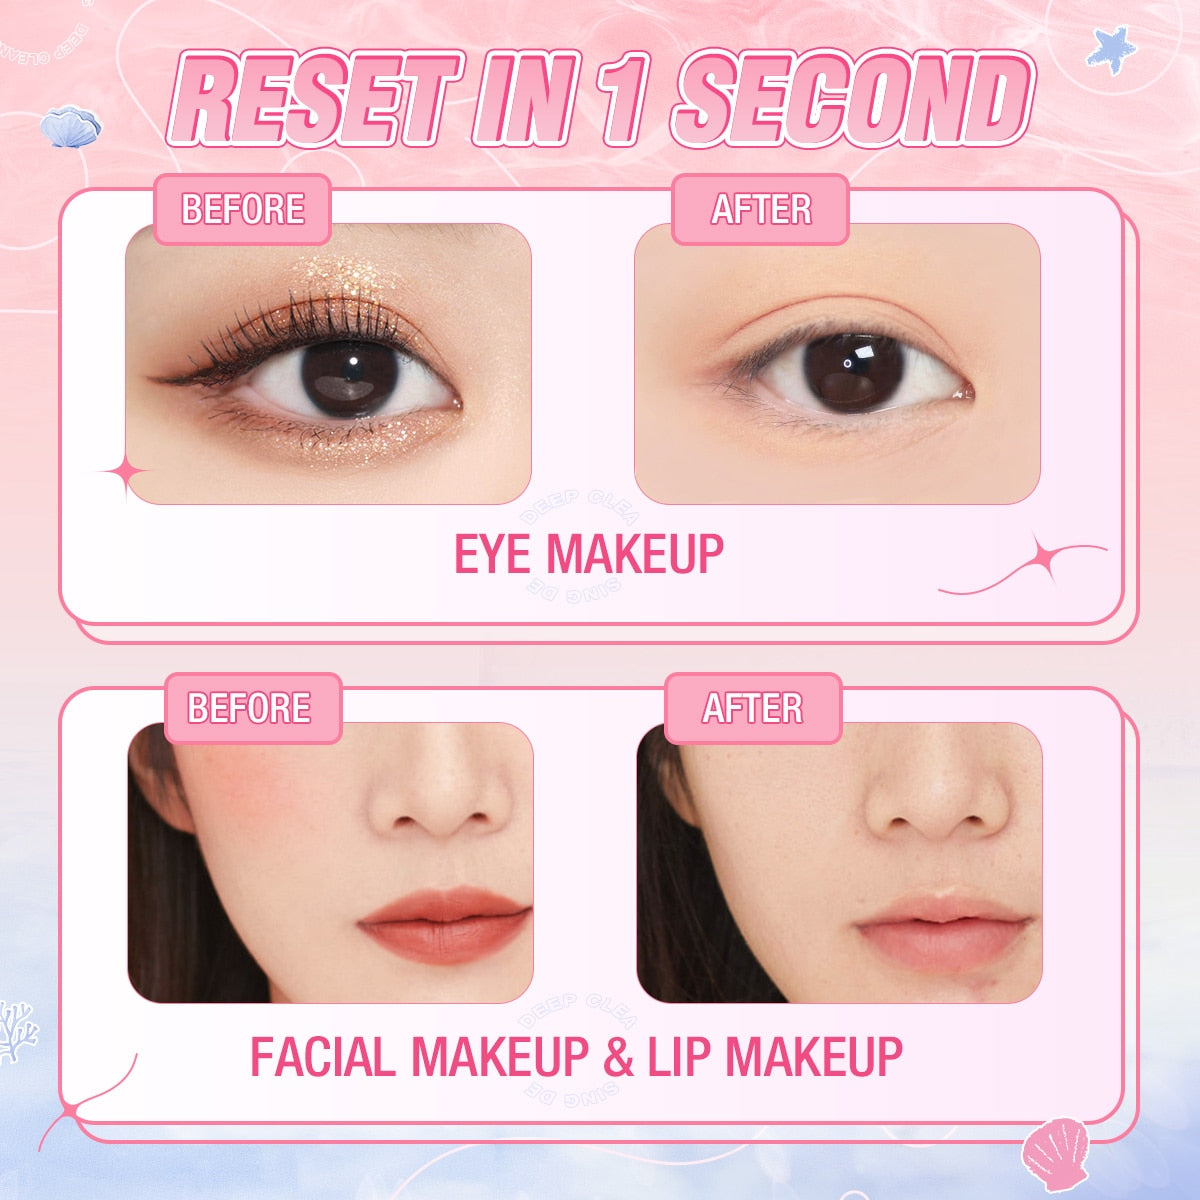 Oklulu 5/10/15/20 Pcs One-second Magic Reset Makeup Remover Soft Face Skin Cleaner Facial Cleaning Beauty Remover Tool